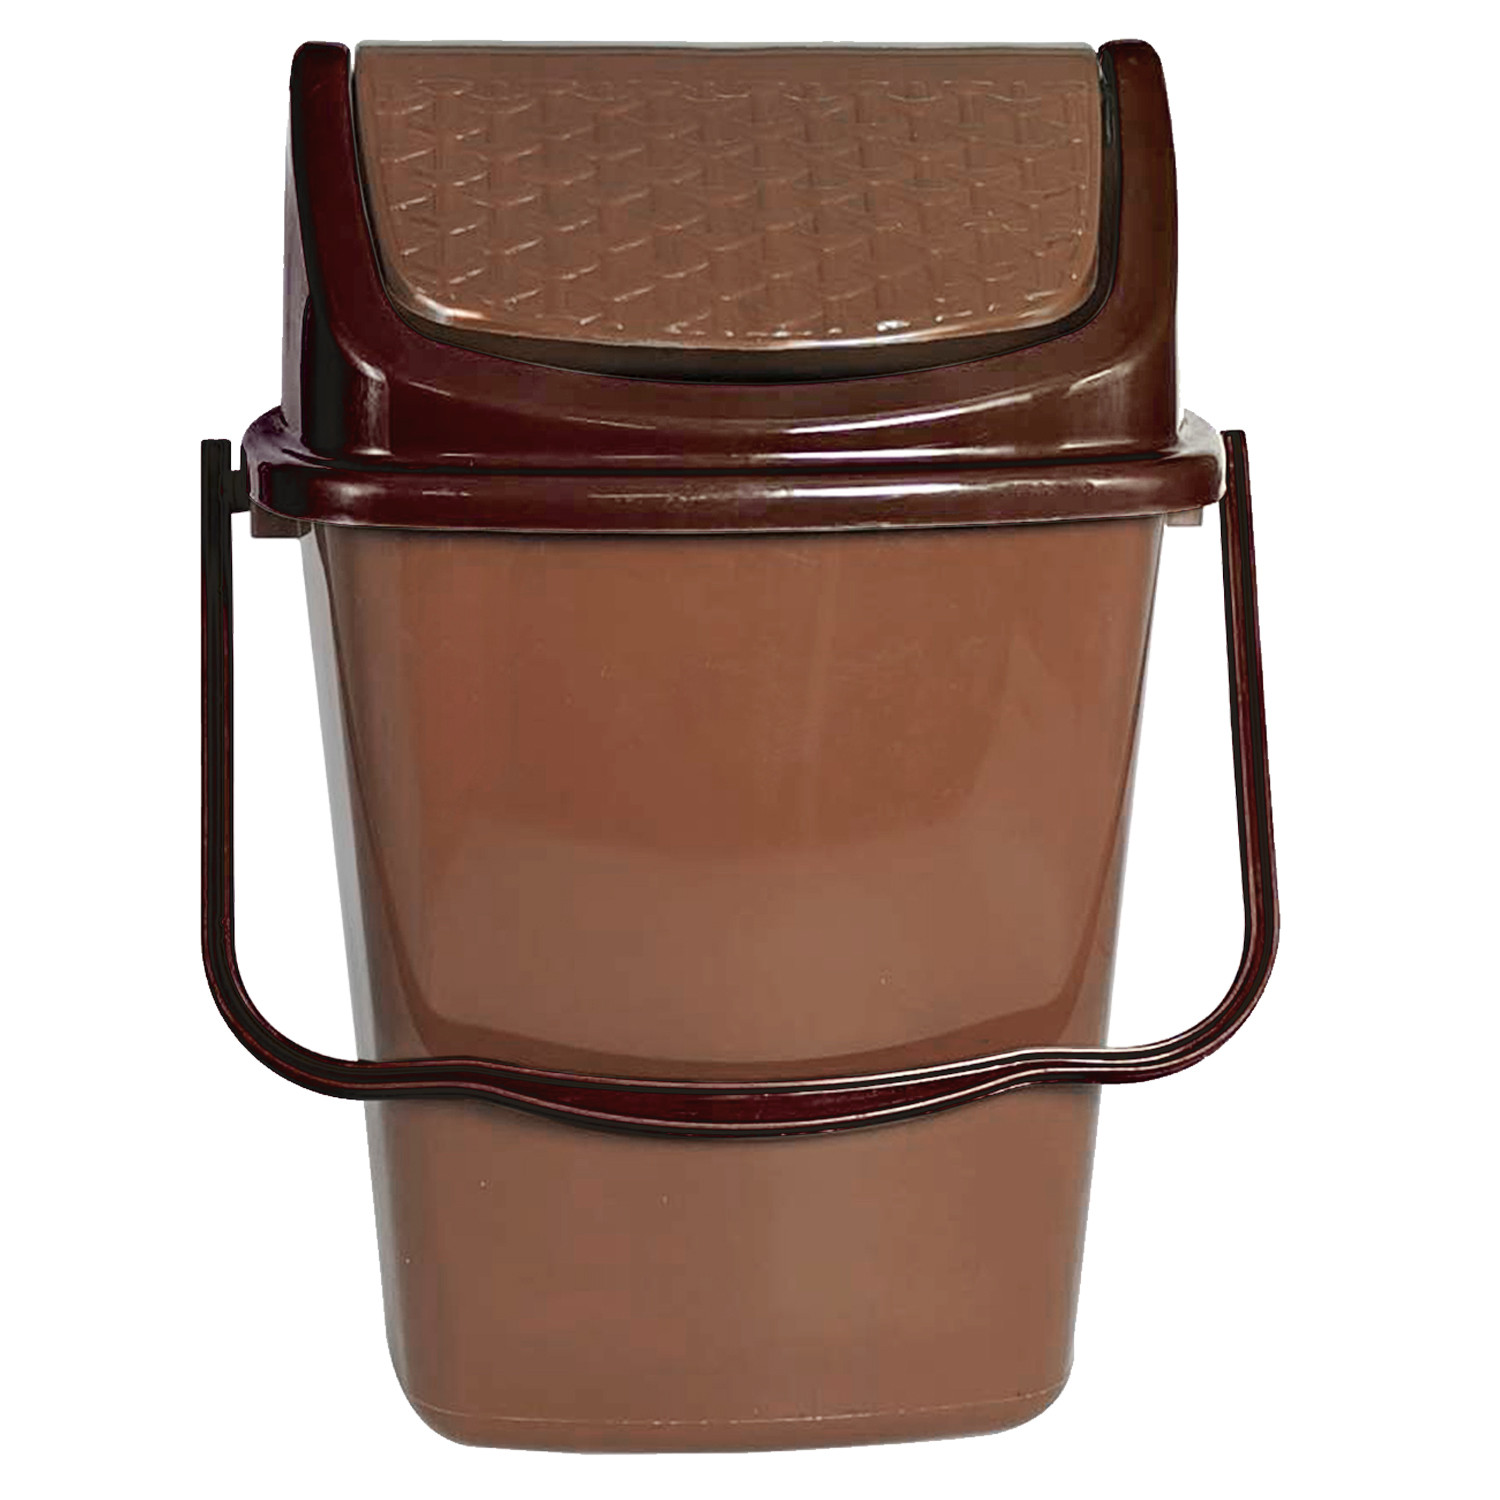 Kuber Industries 3 Pieces Delight Plastic Swing  Garbage Waste Dustbin for Home, Office with Handle, 5 Liters (Green & Brown & Light Brown)